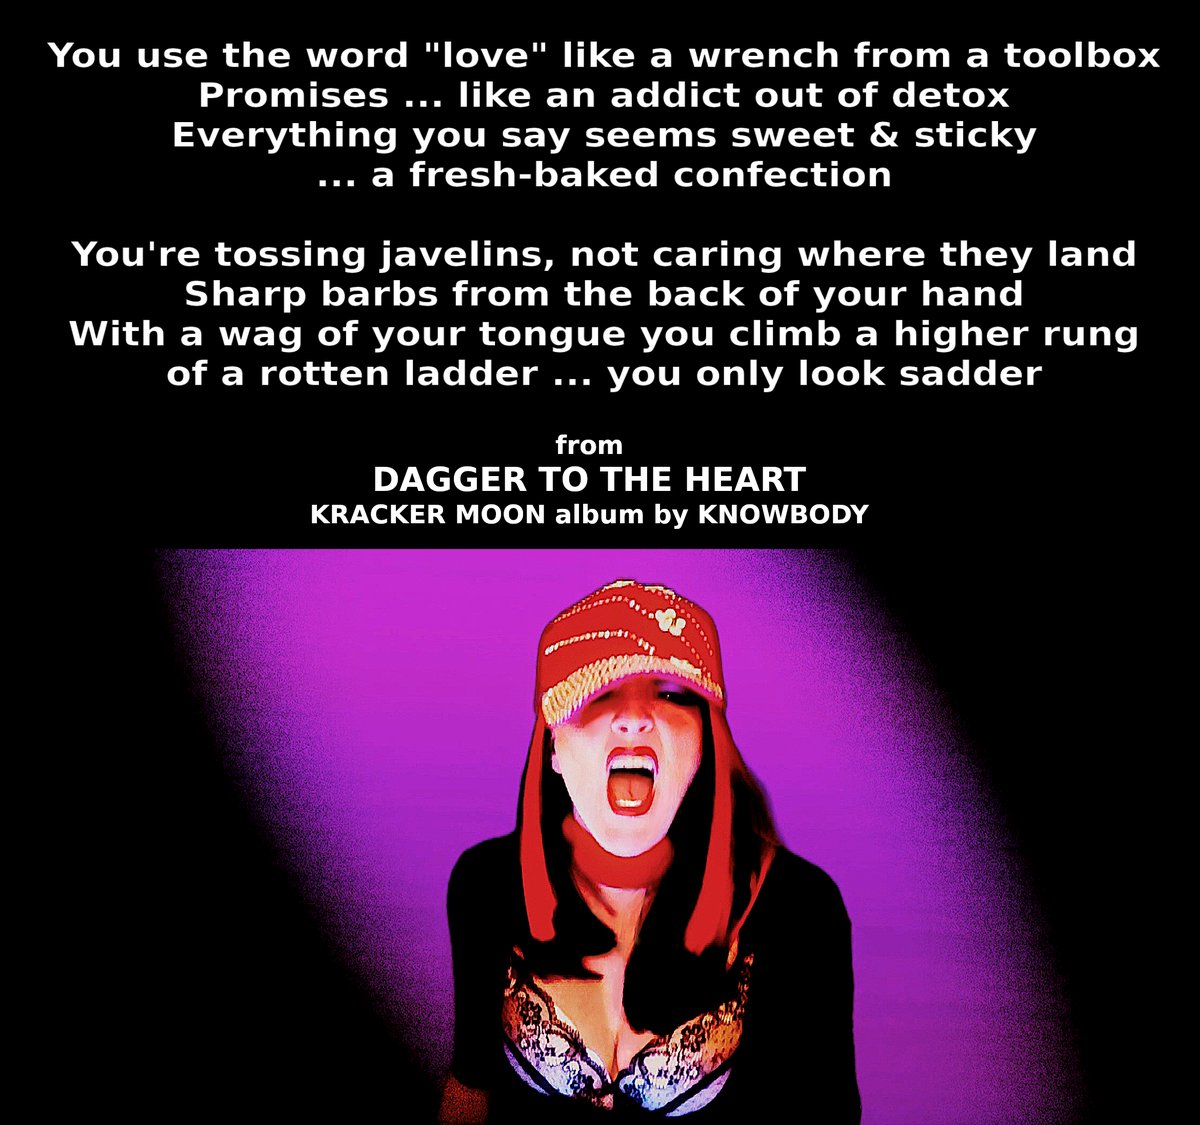 Kracker doesn't get angry ... she gets EVEN ;) @Kayhahn1 Lyrics from the upcoming #Knowbody album 'Kracker Moon' featuring K Hahn's alter ego, kicking out the JAM! #newmusic #newrock #solofemaleartist #KrackerMoon